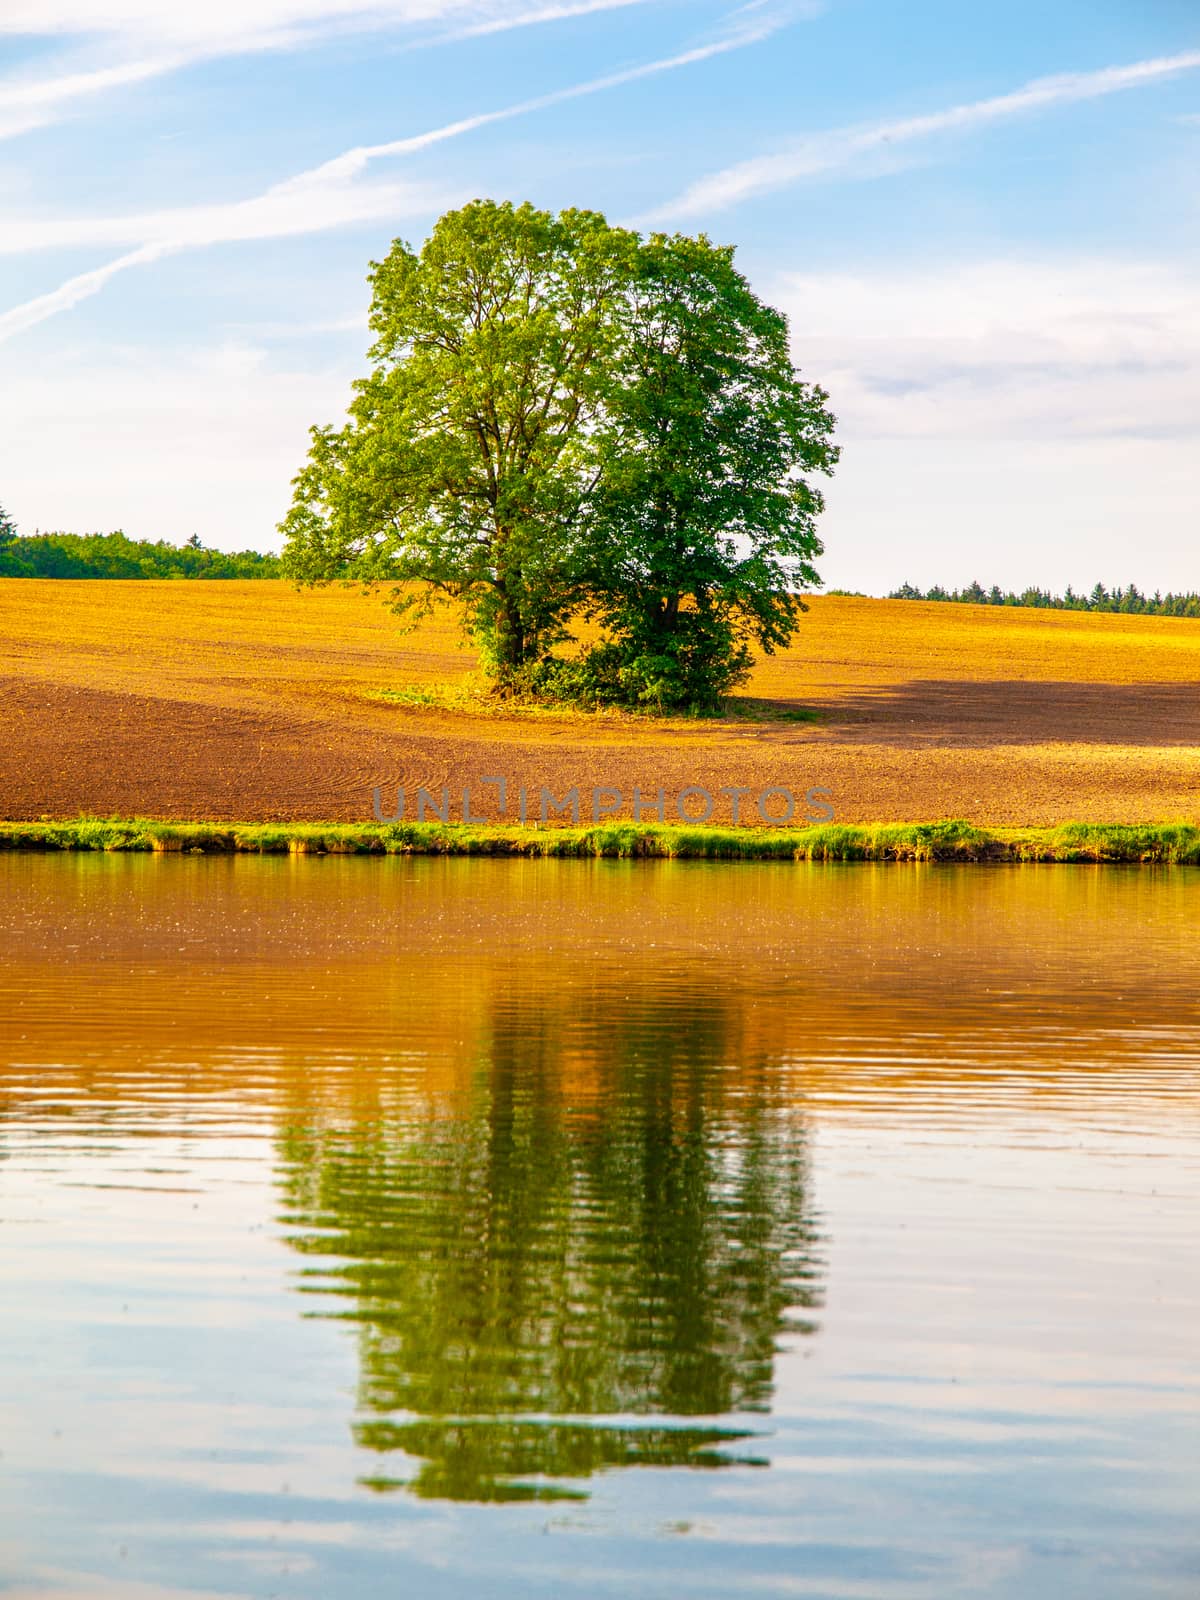 Solitary old large tree with lush green leafs on the brown spring field reflected in the water by pyty